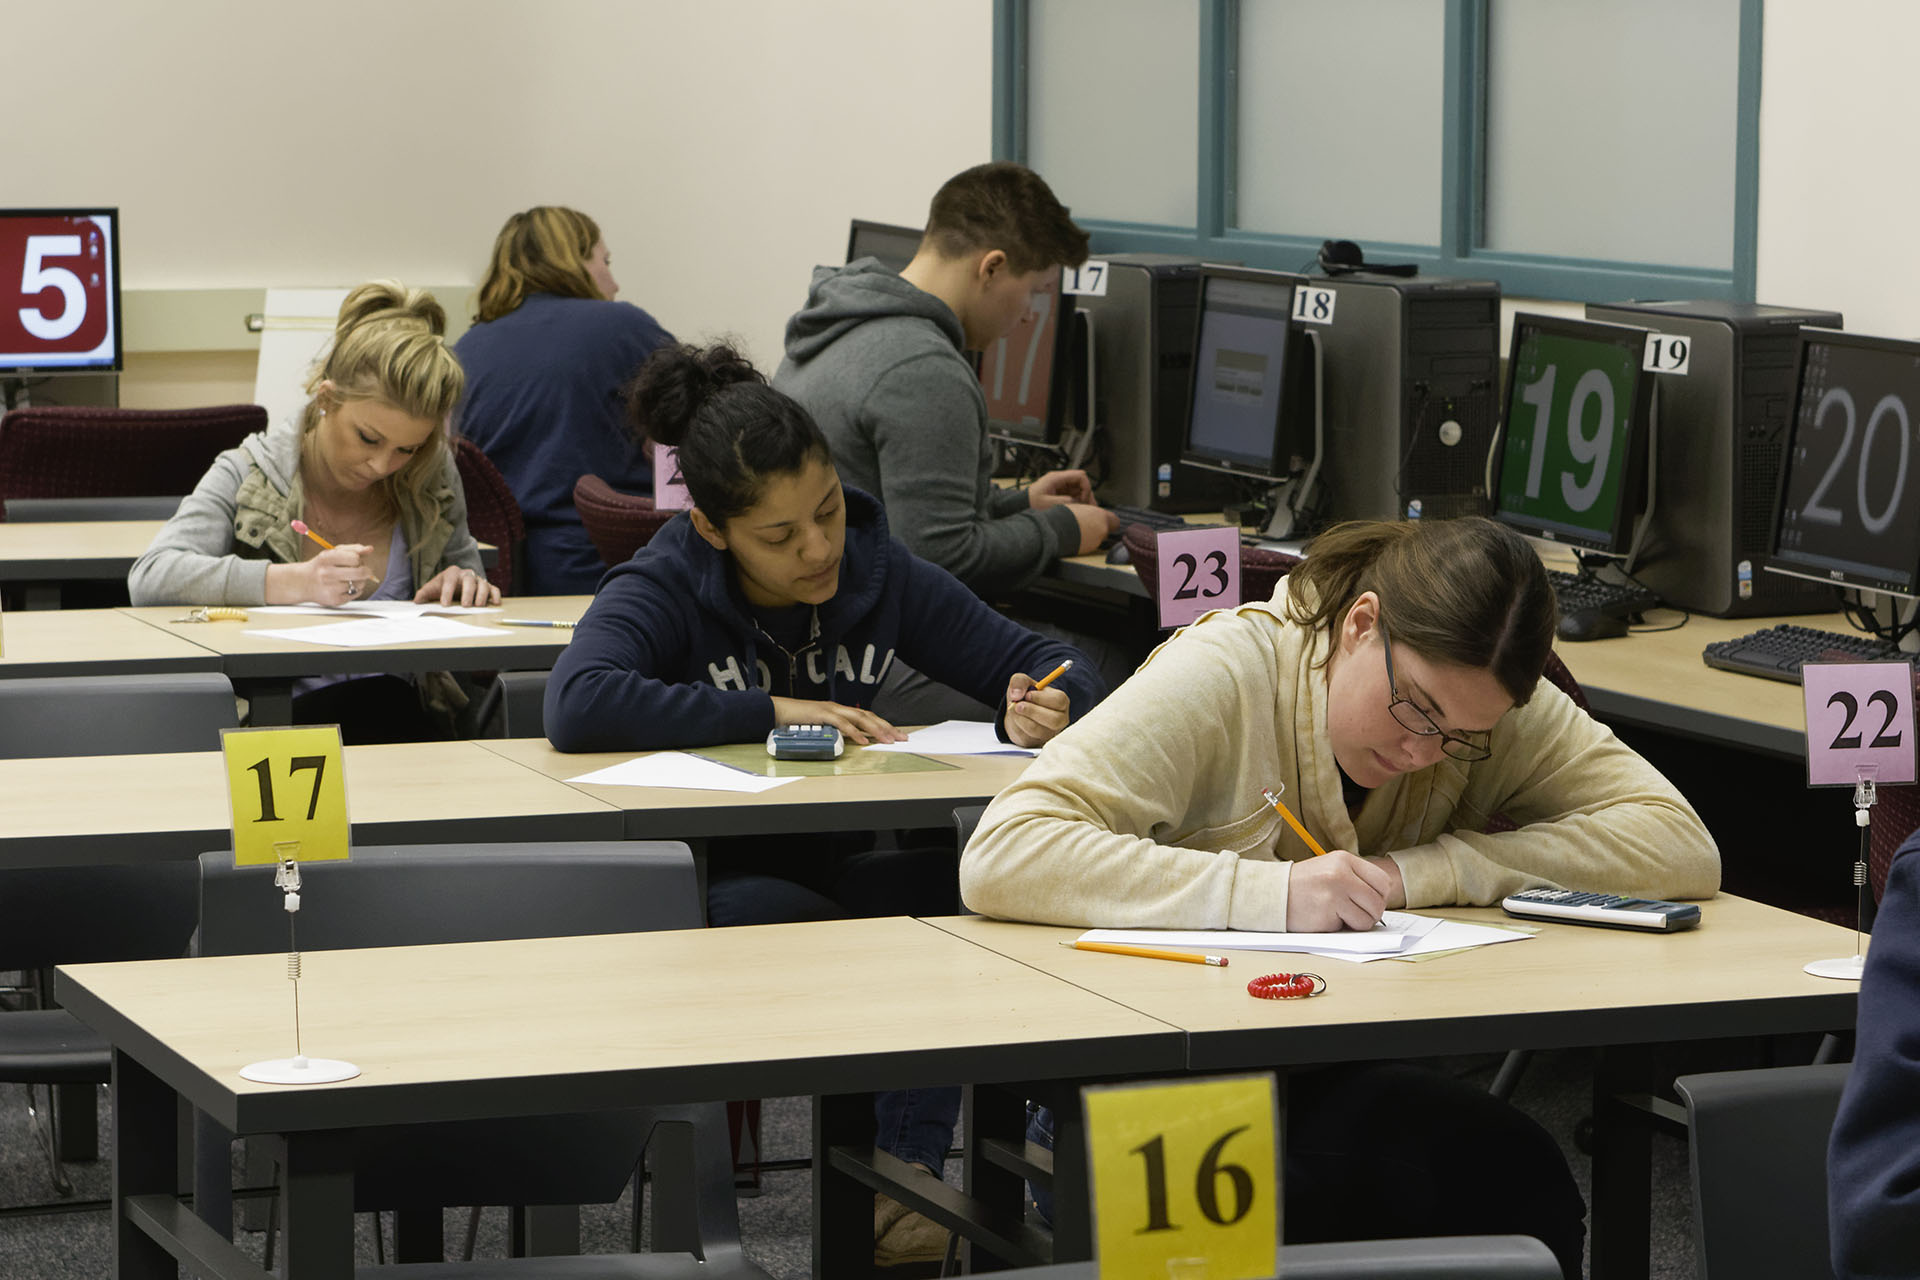 Students taking a placement test